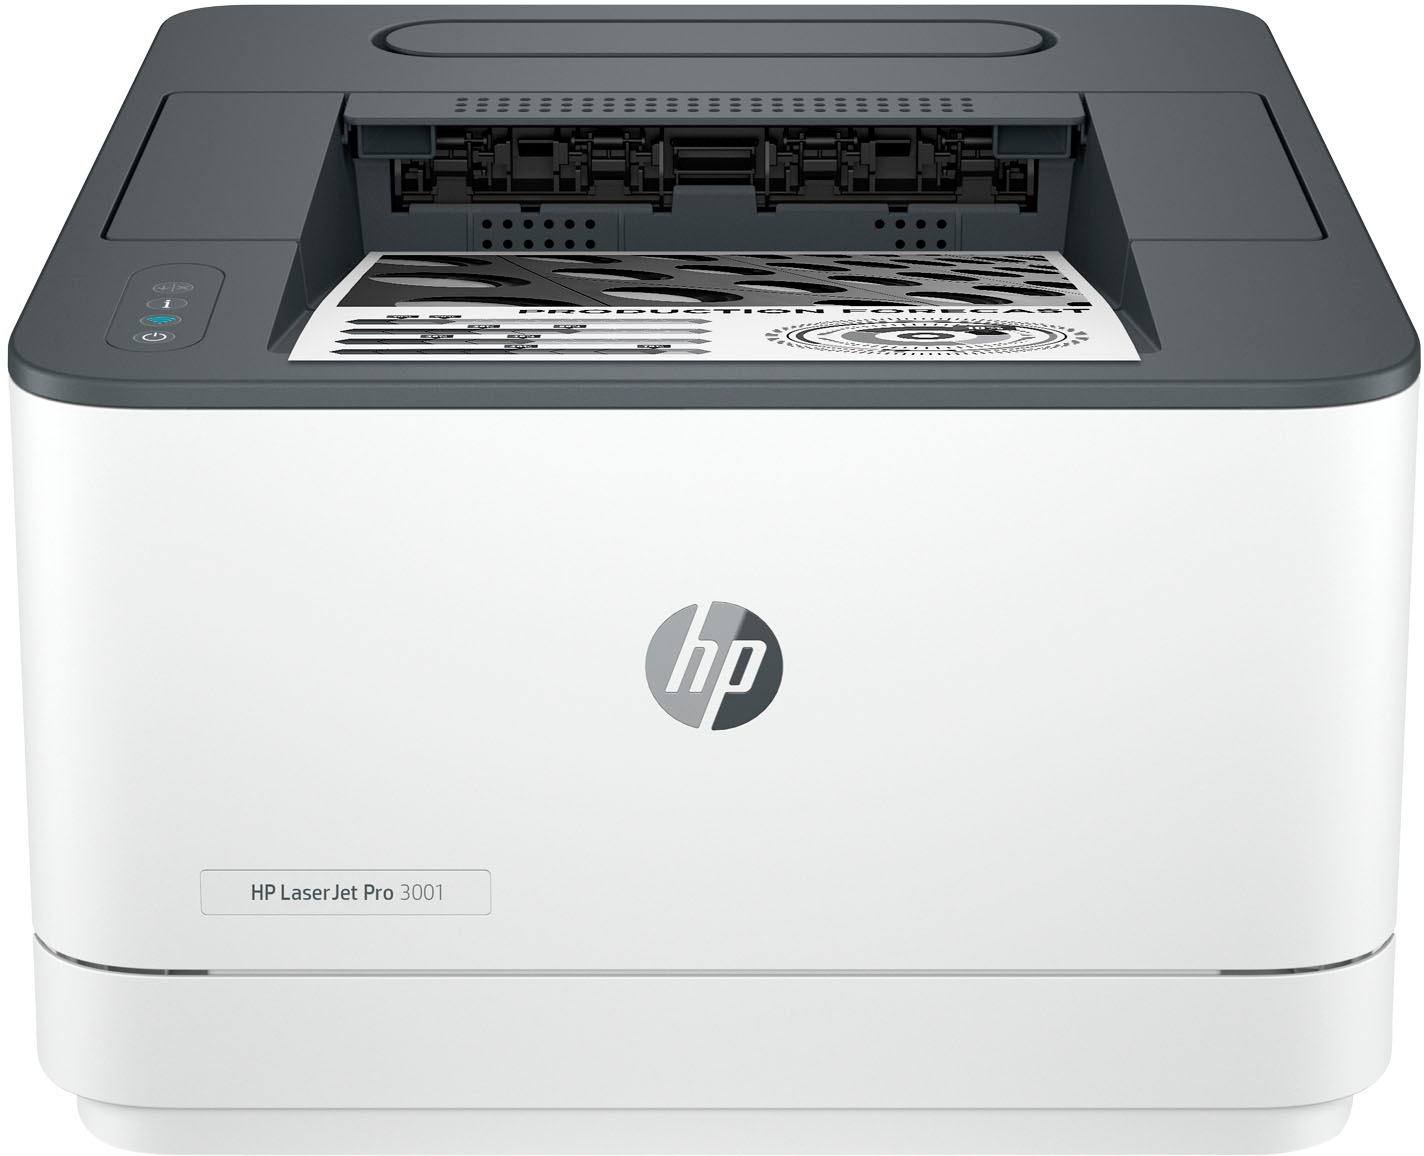 5 Best HP Laser Printers for Small Business - HP Store Canada